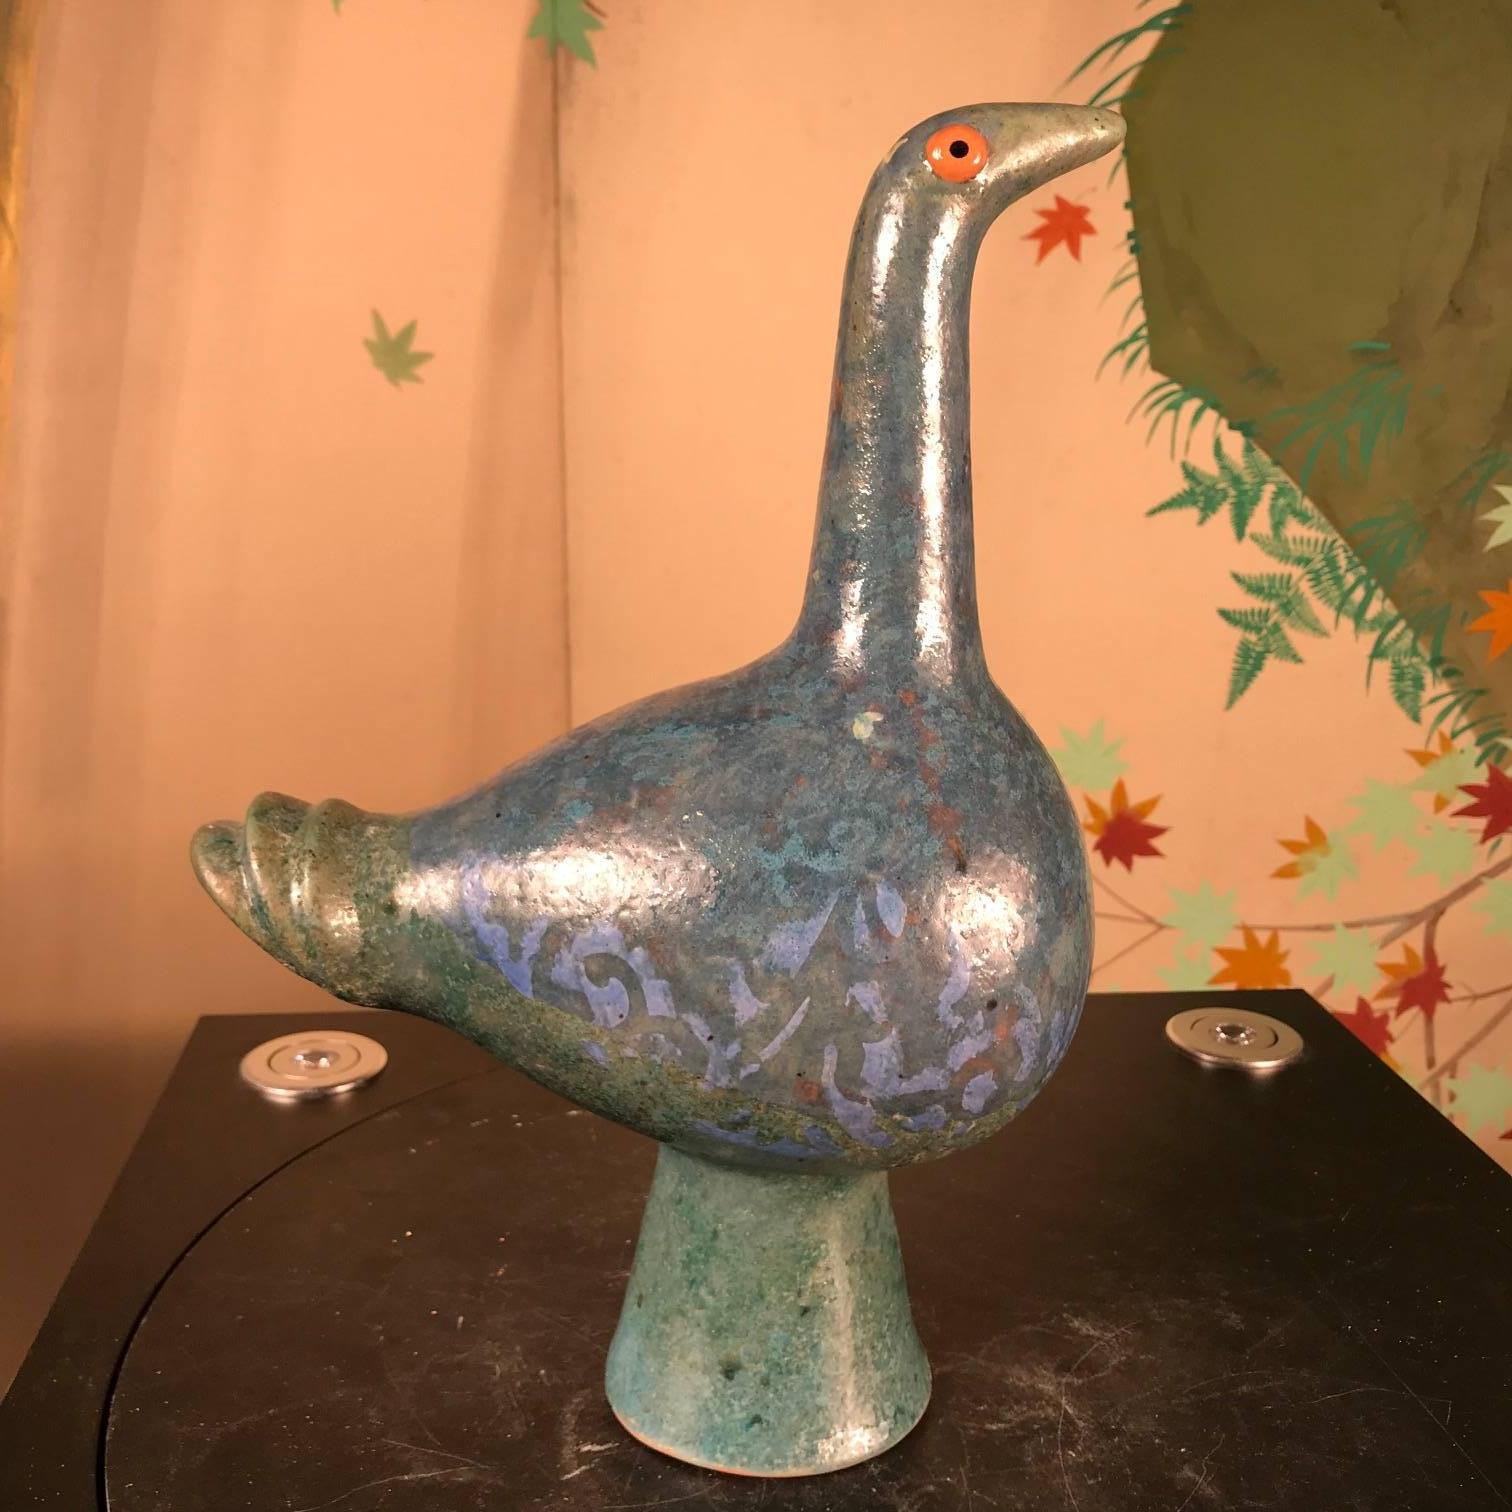 20th Century Whimsical Blue Bird Sculpture Hand-Painted by Eva Fritz-Lindner